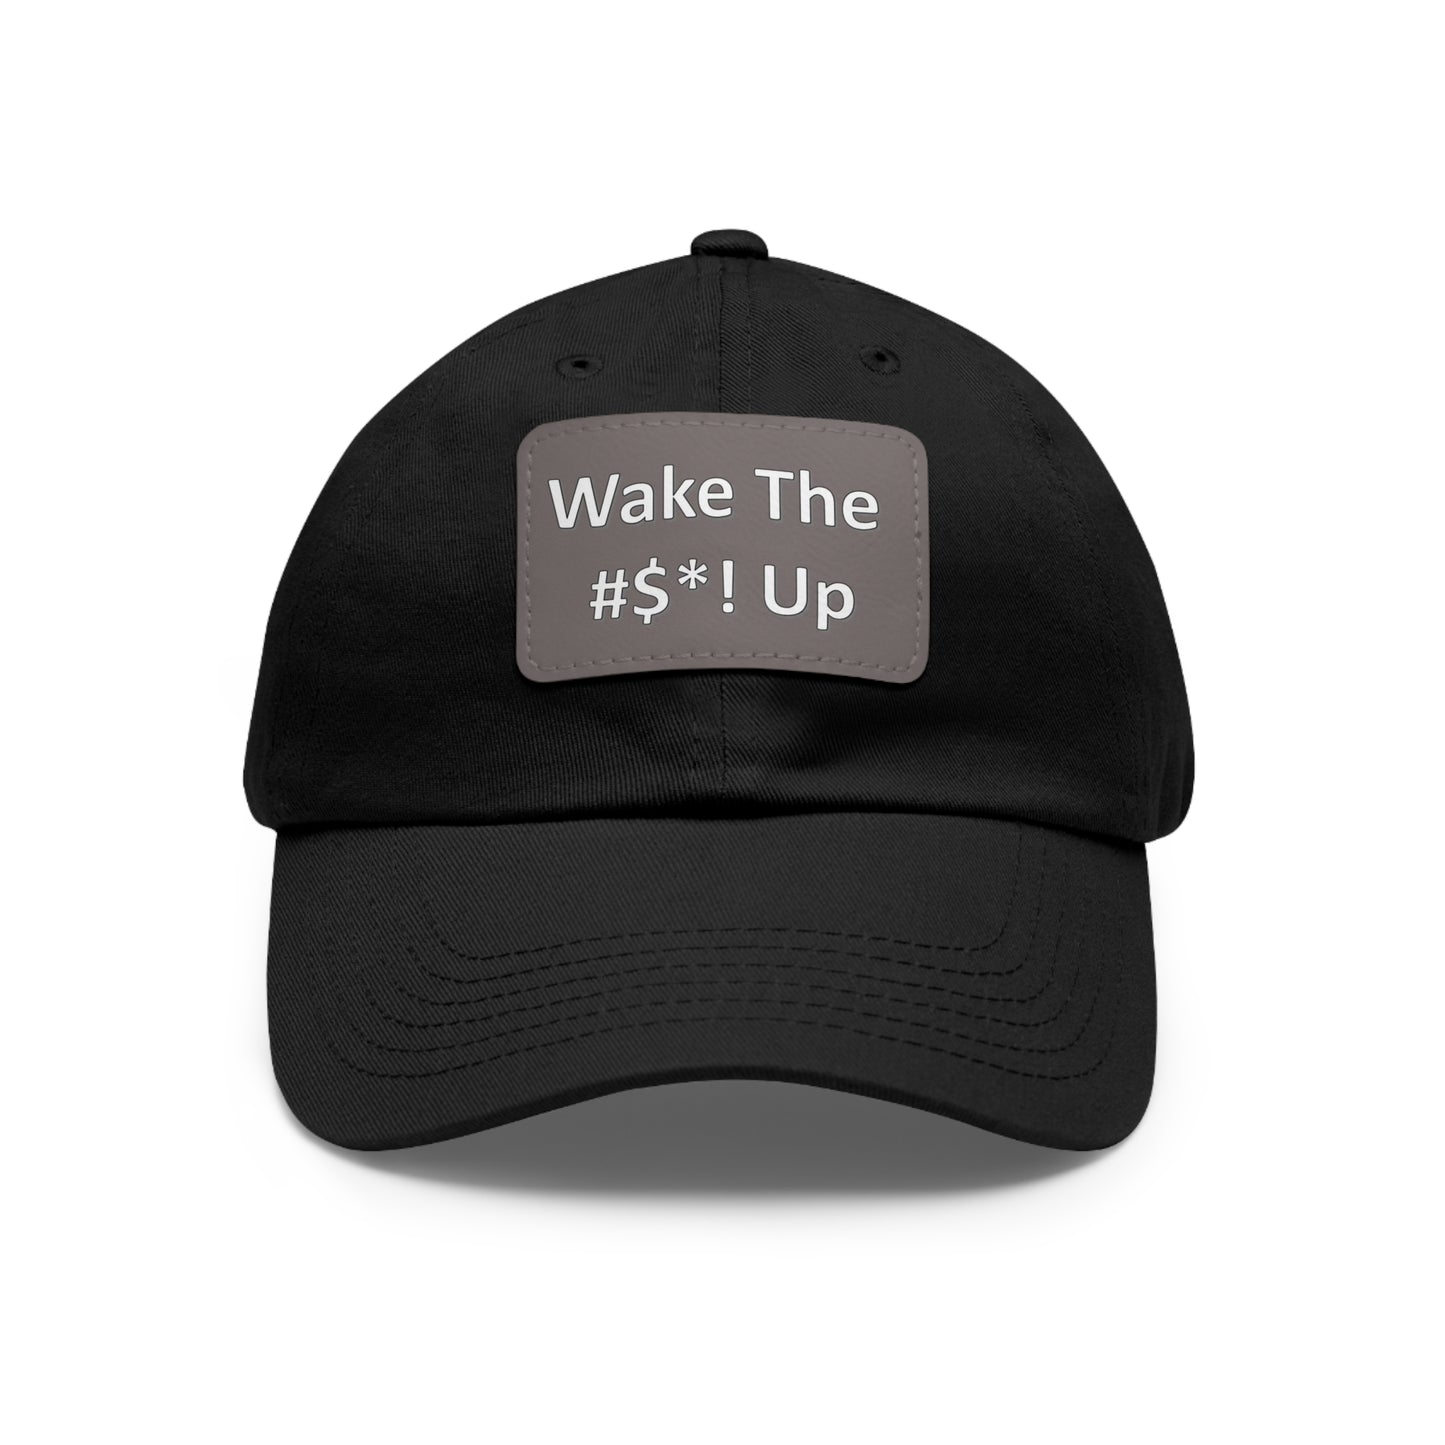 Wake The #$*! Up - Hat with Leather Patch (Rectangle)